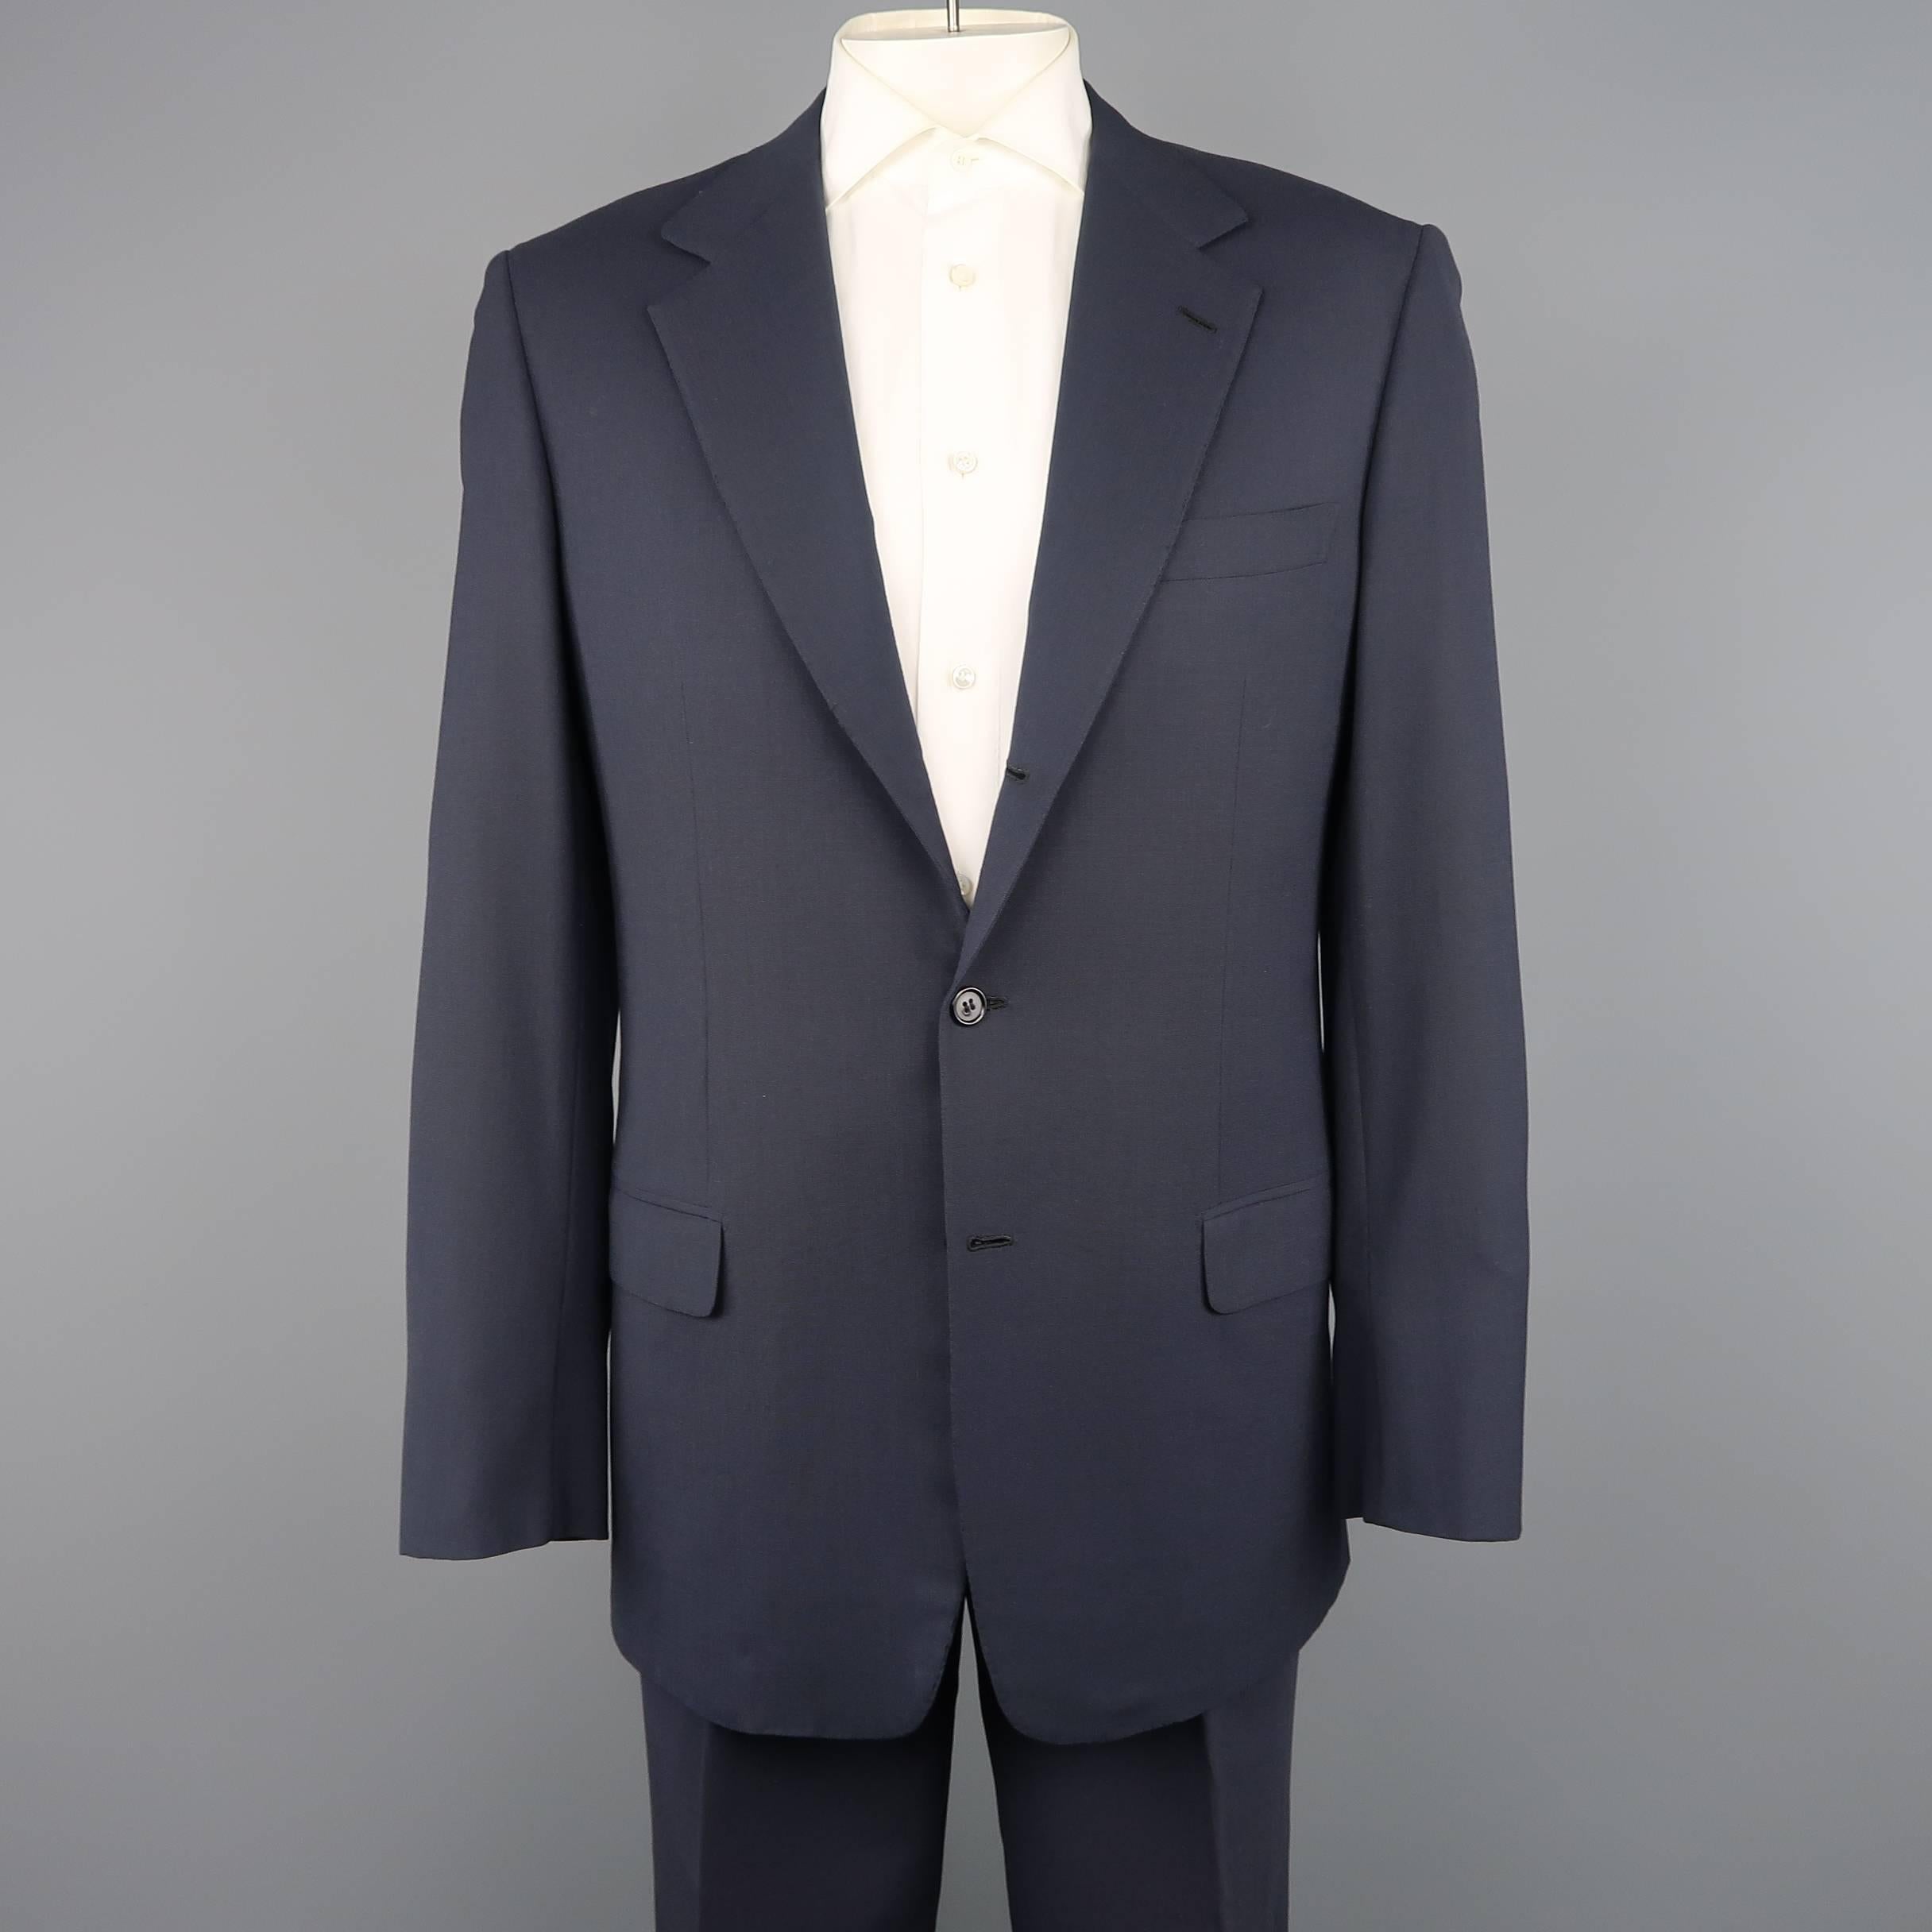 Vintage two piece BRIONI-NOMENTANO suit comes in woven navy blue wool and includes a single breasted, three button sport coat with notch lapel and functional button cuffs and matching pleated, cuffed hem trousers. Made in Italy.
 
Good Pre-Owned